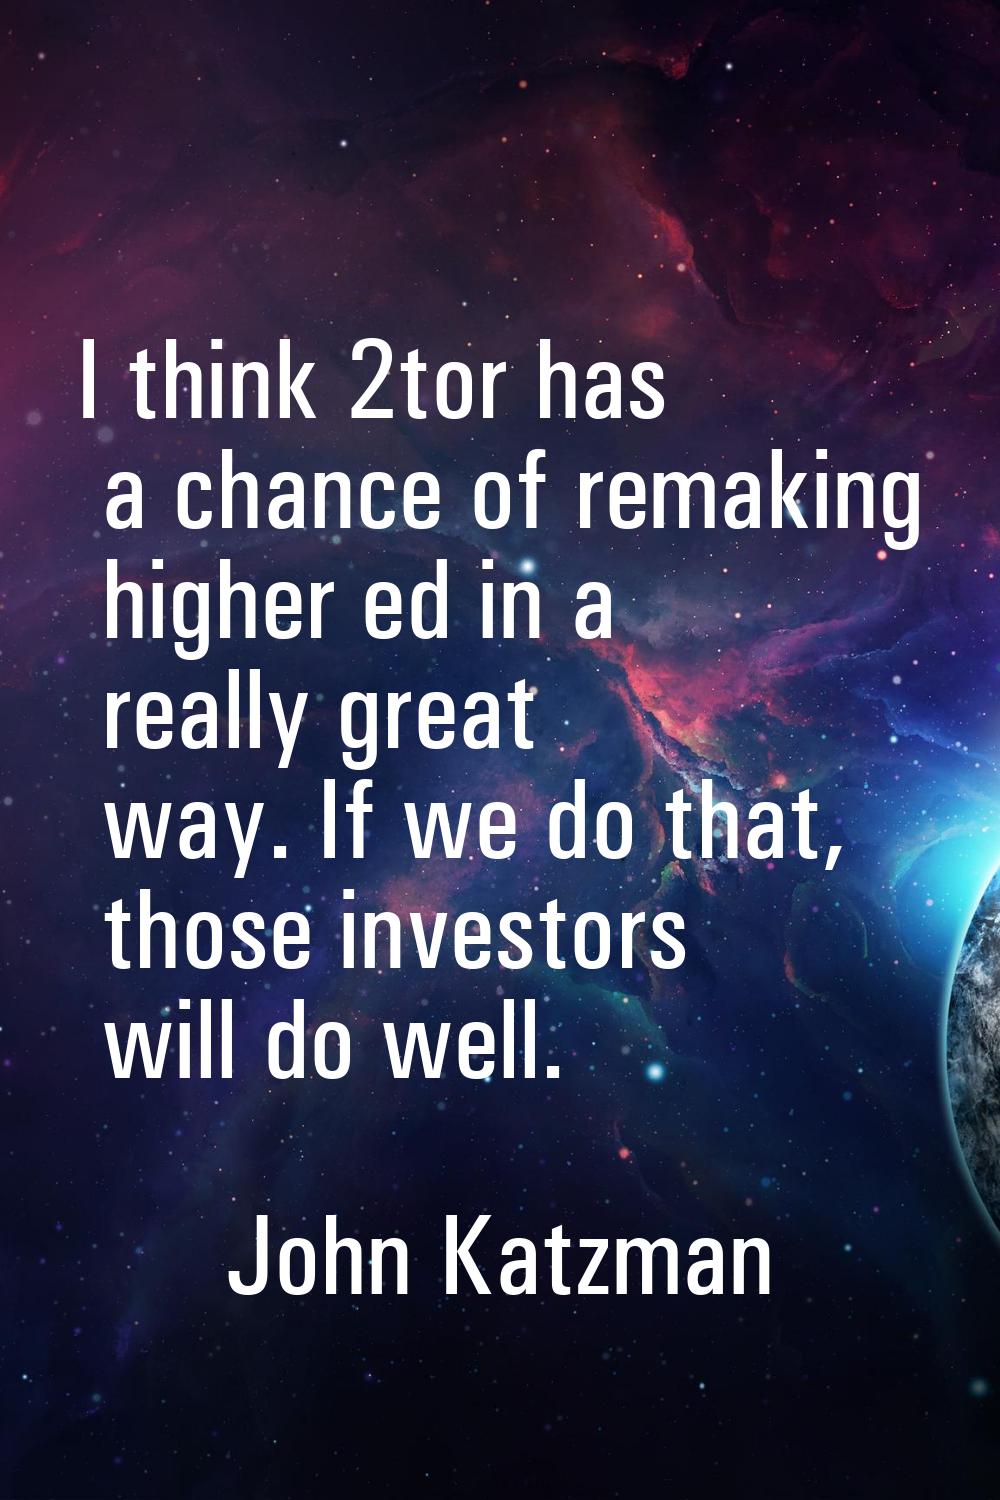 I think 2tor has a chance of remaking higher ed in a really great way. If we do that, those investo